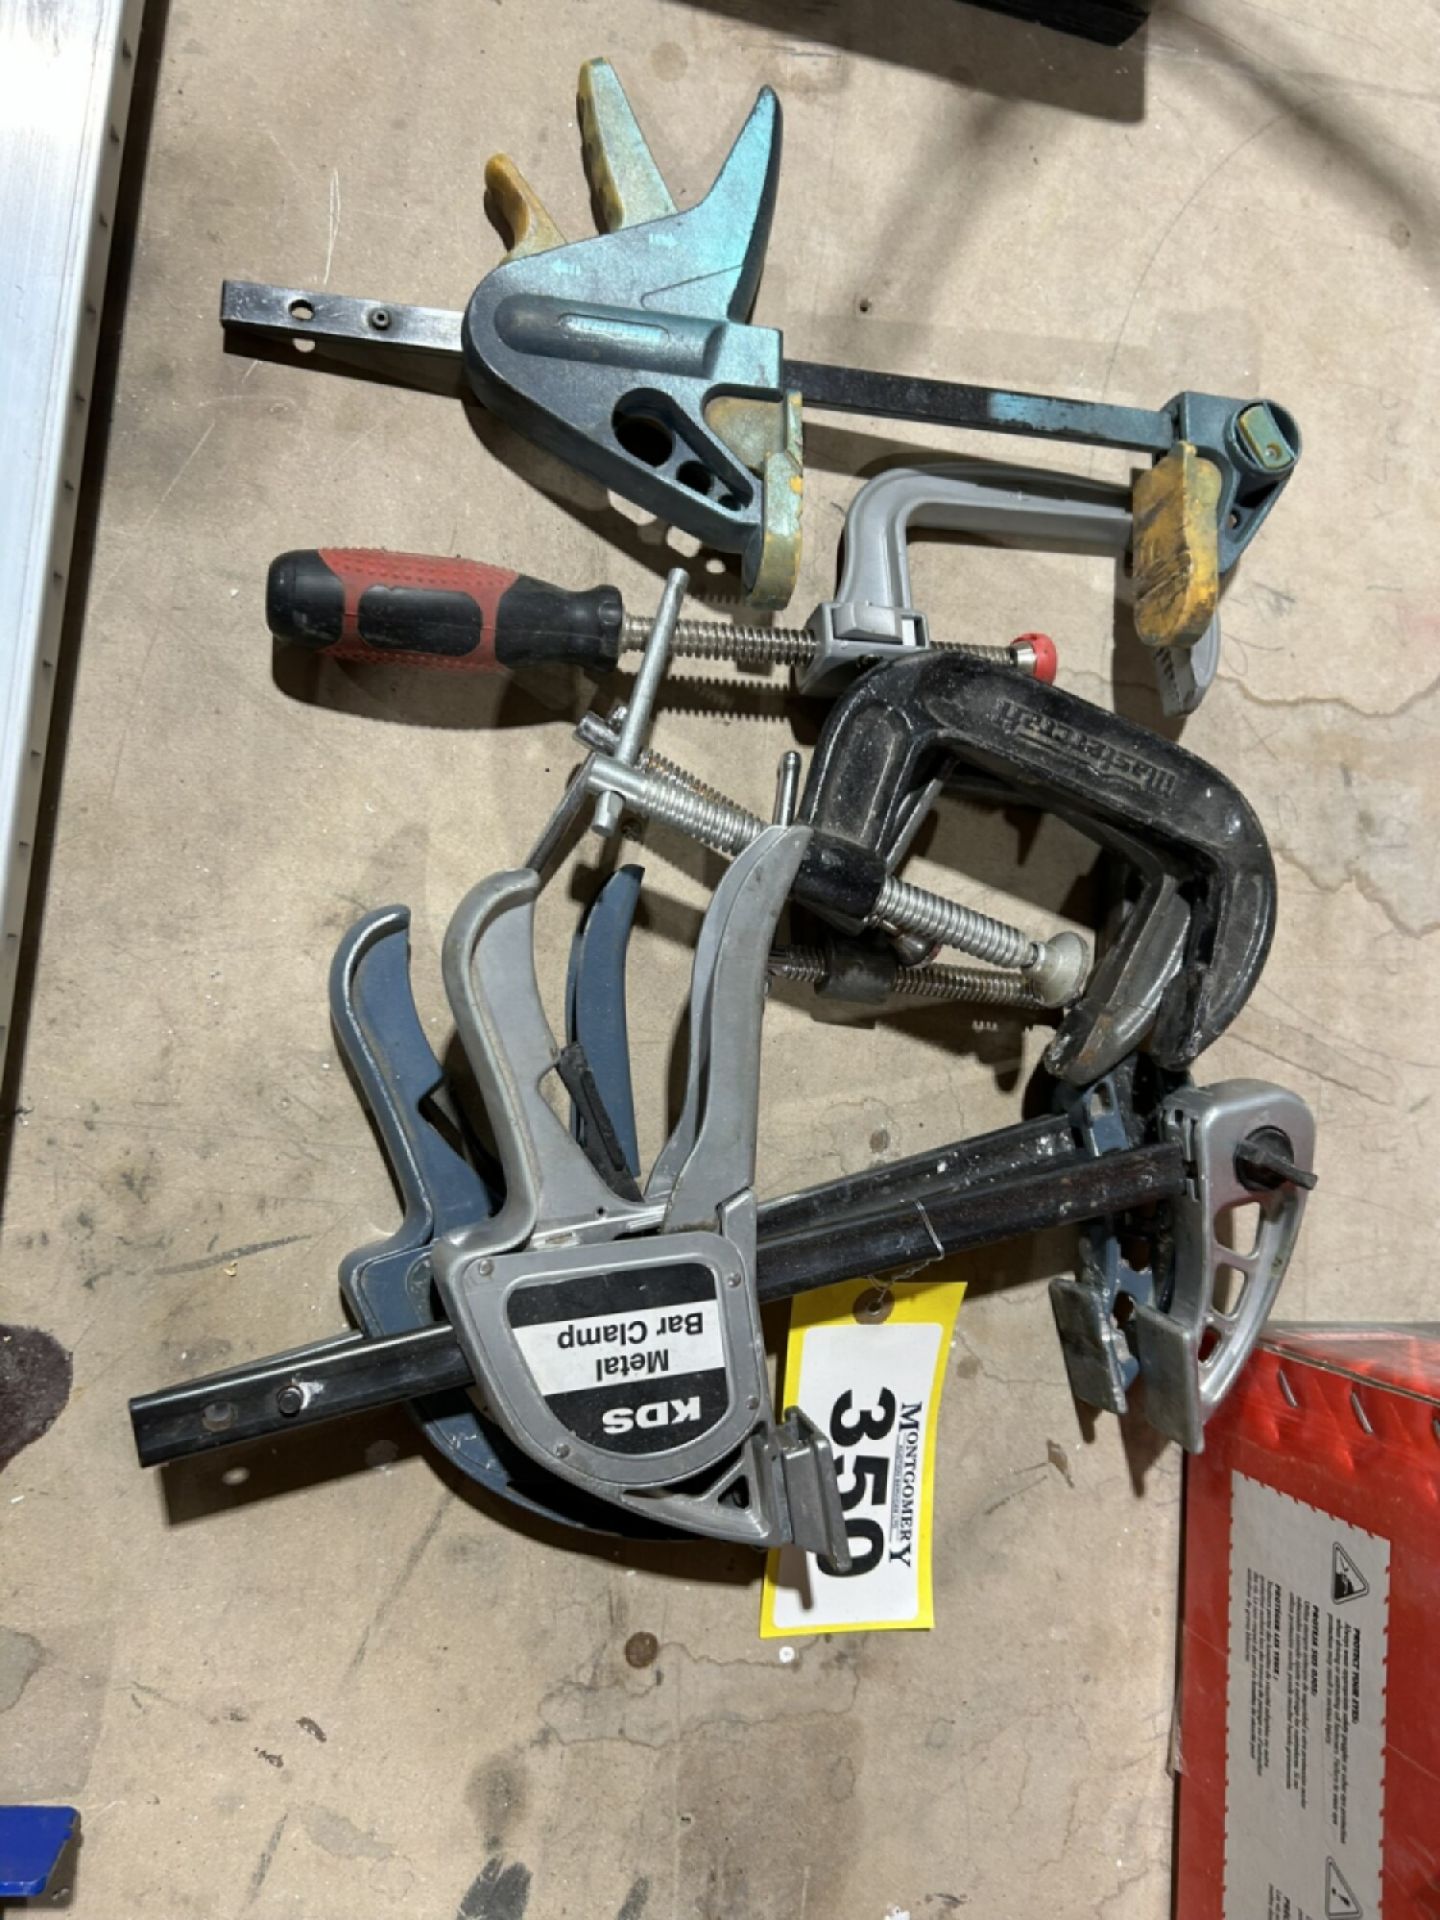 2.5" C-CLAMPS, 4" C-CLAMPS, KDS METAL BAR CLAMPS, AND ASSORTED CLAMPS